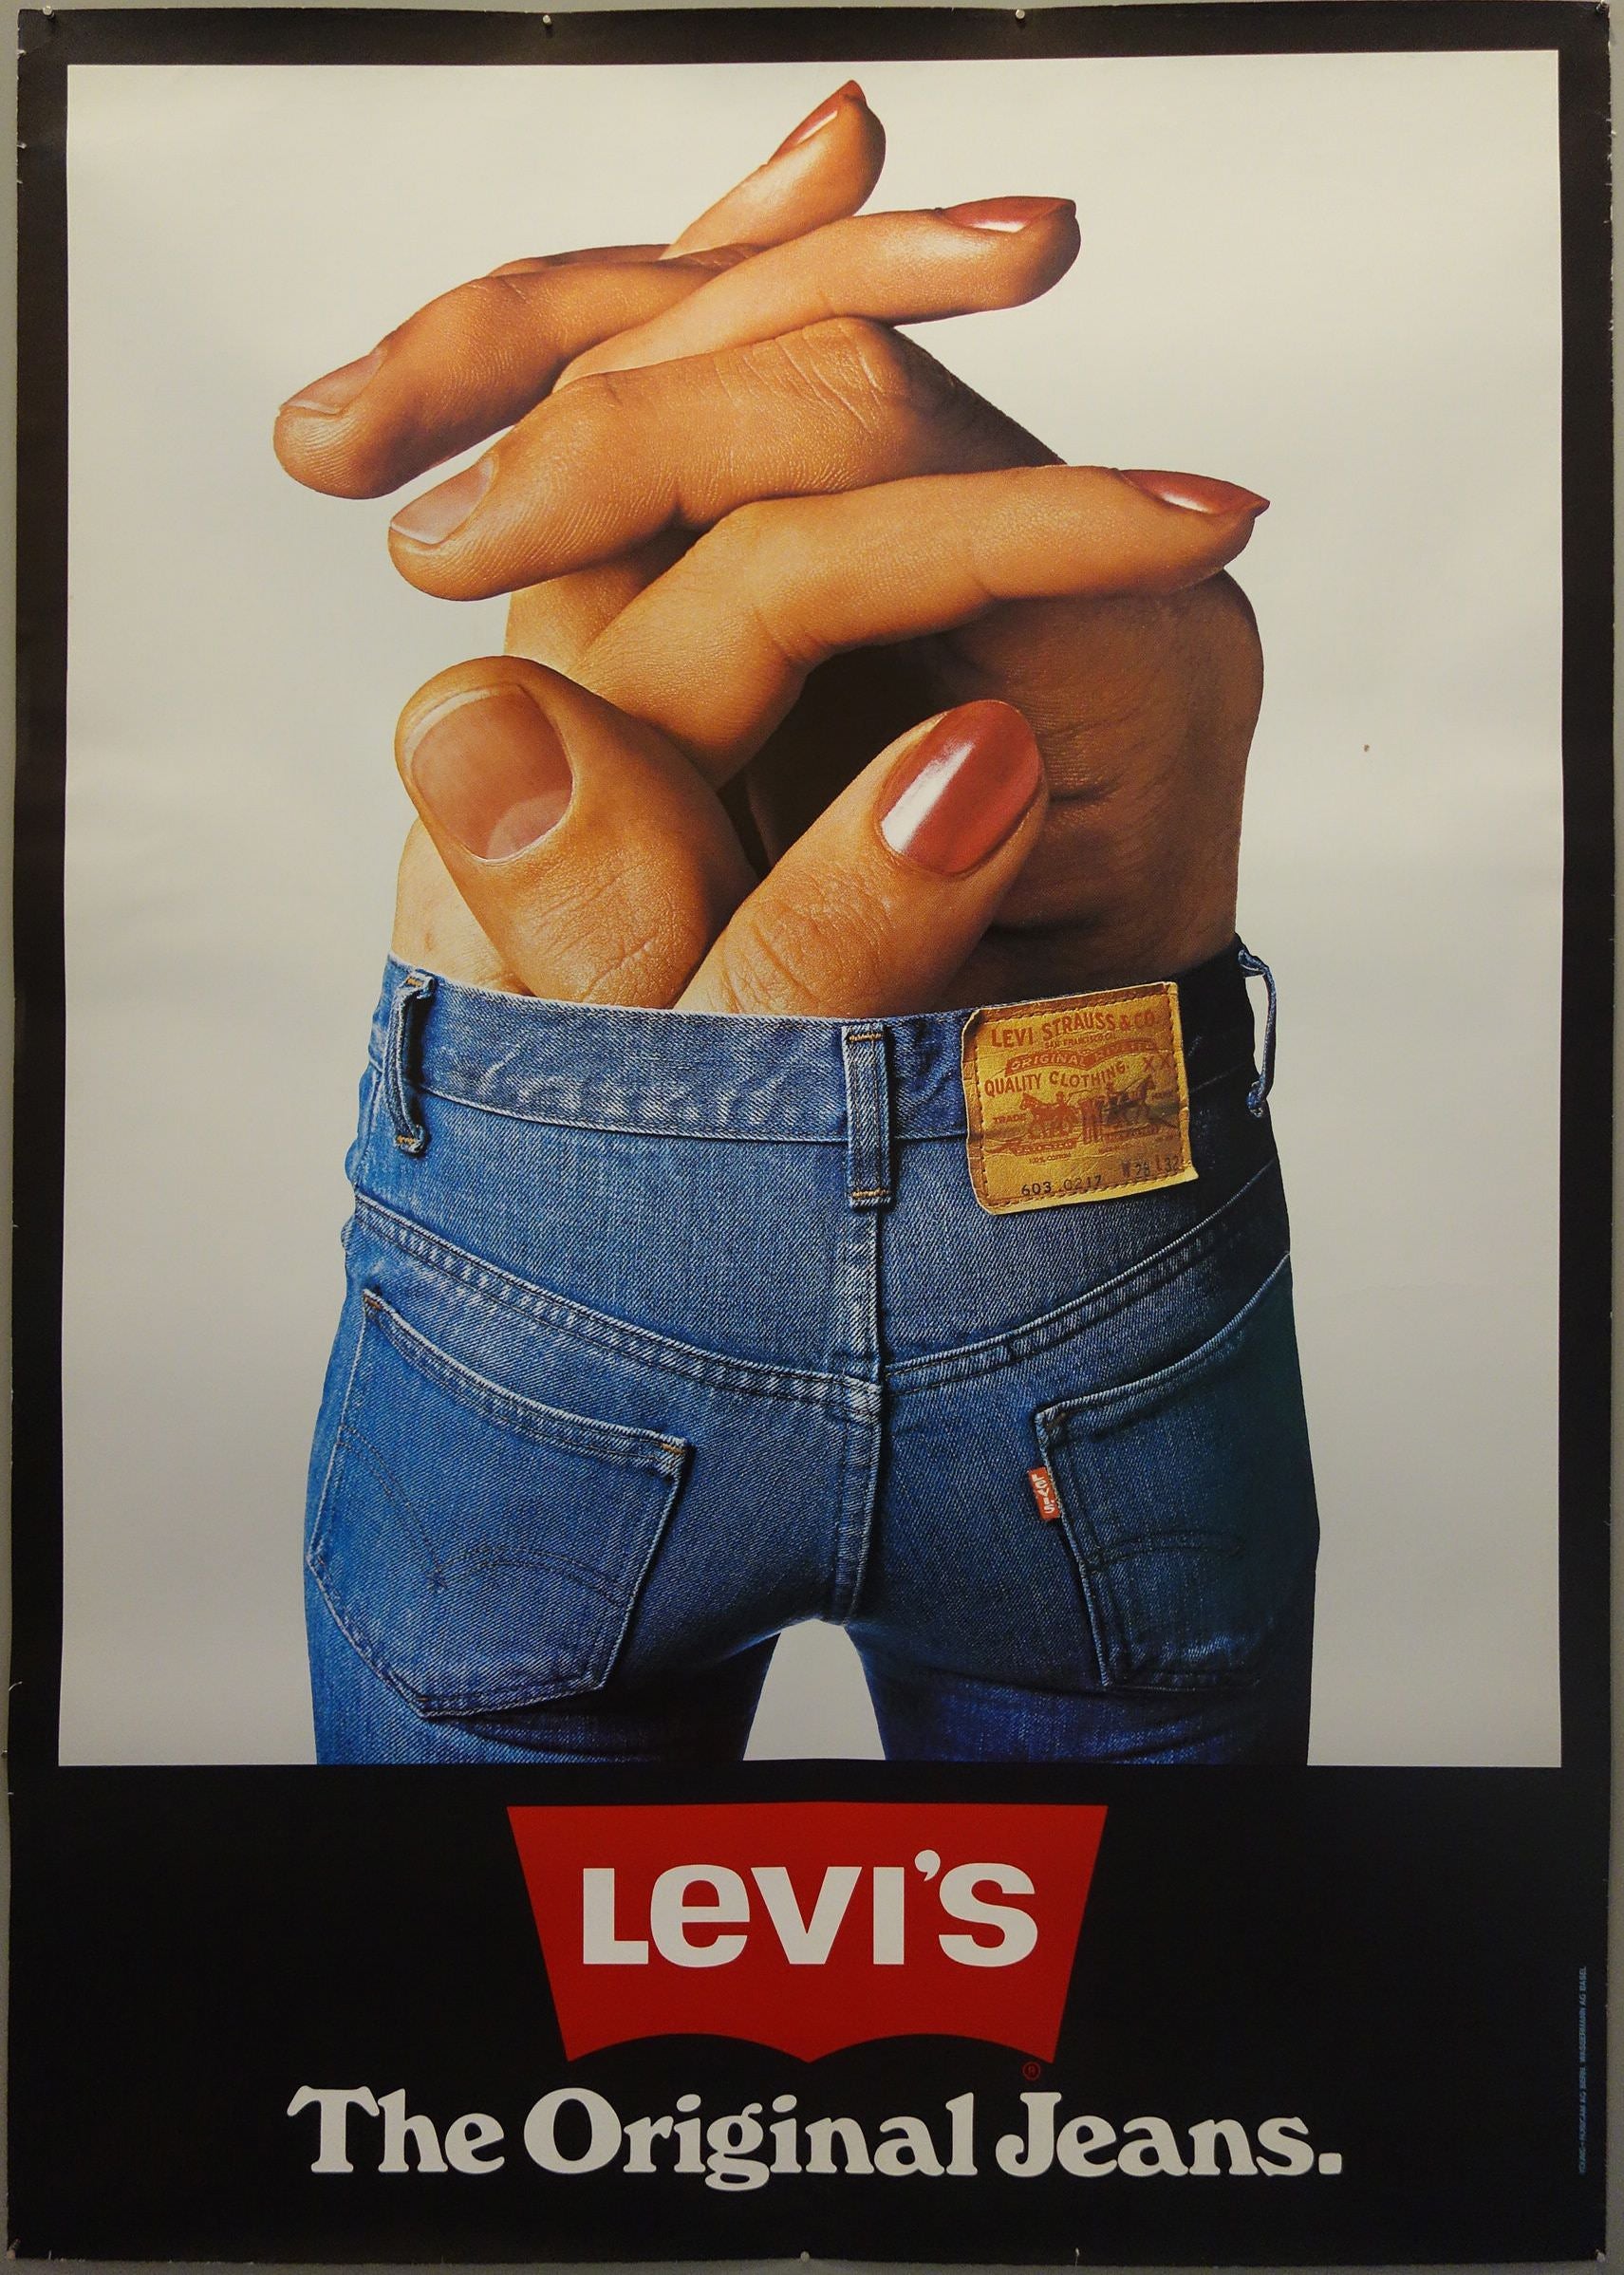 levi strauss advertising posters